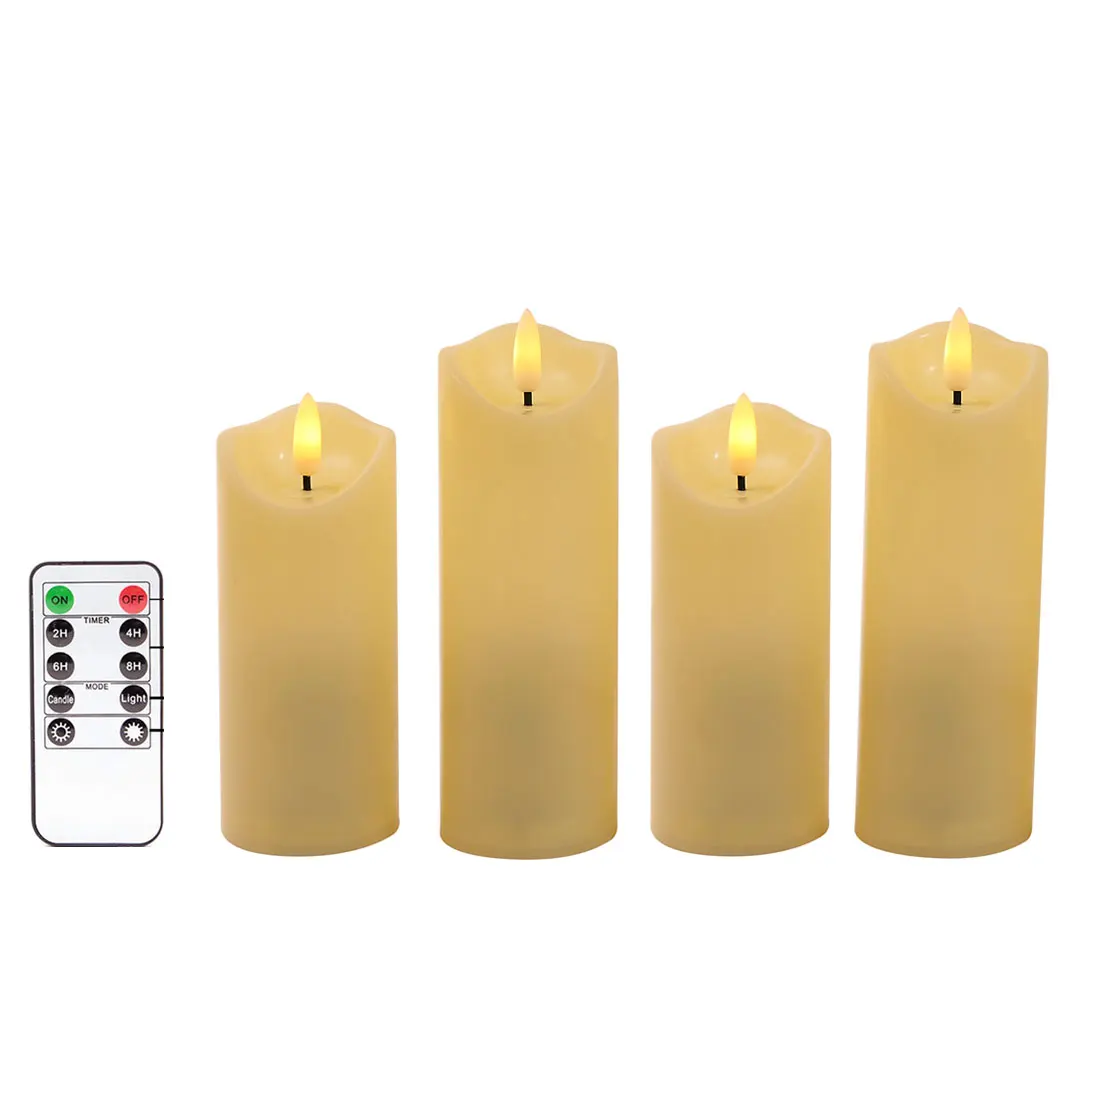 Remote Control Warm White Flickering Light Battery Powered Flameless Candles,Electric Fake Tealight Votive Window Decoration